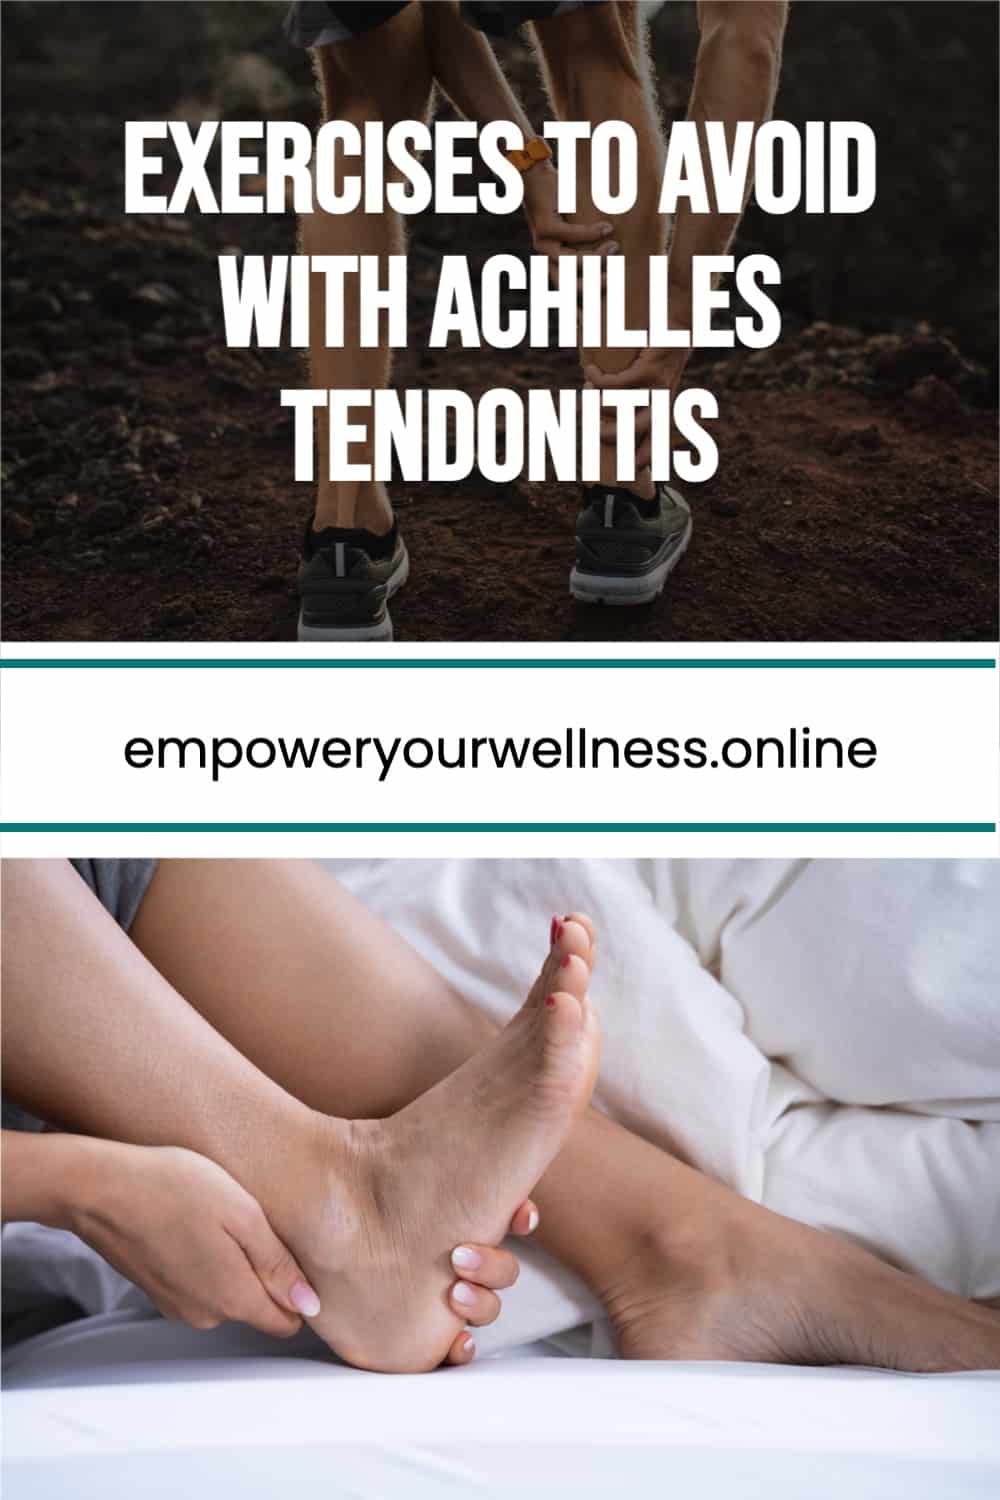 5 Exercises To Avoid With Achilles Tendonitis - EMPOWER YOURWELLNESS